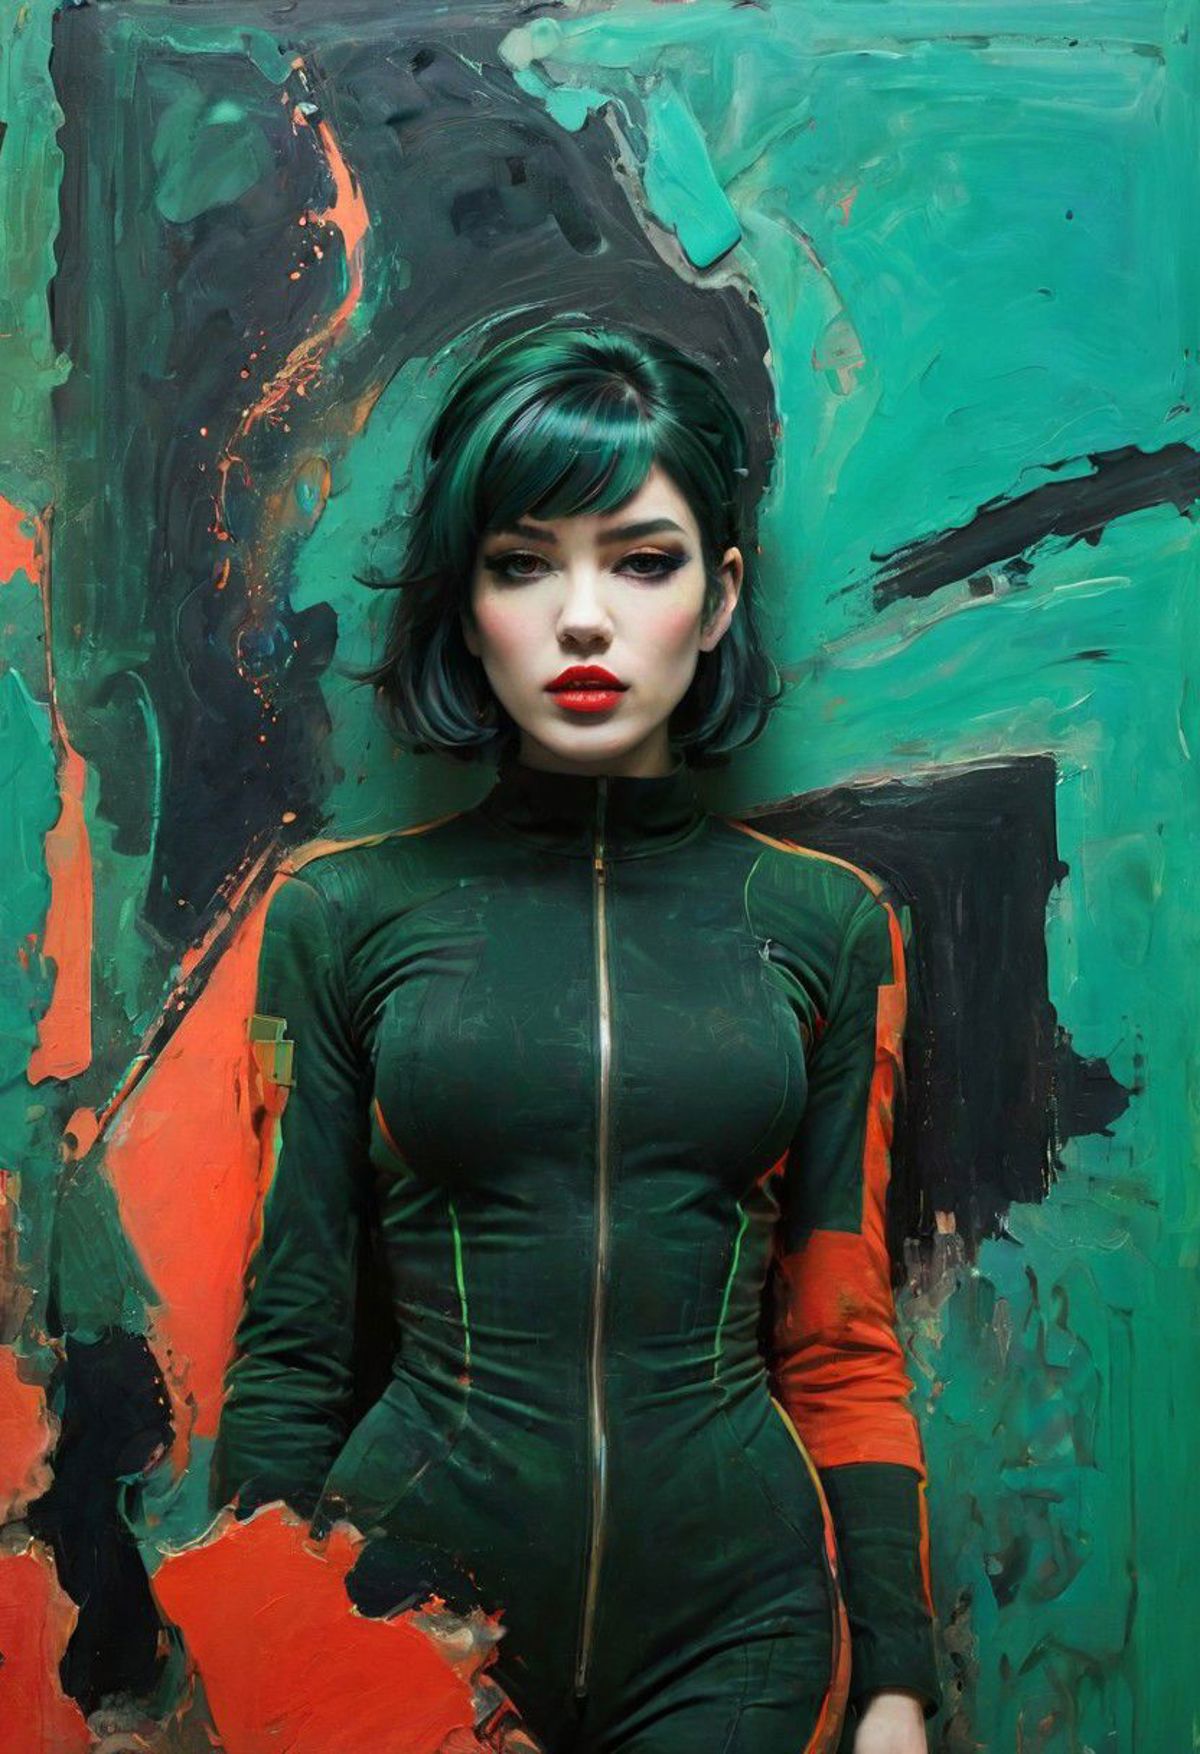 A woman in a green and orange outfit stands in front of a painting.